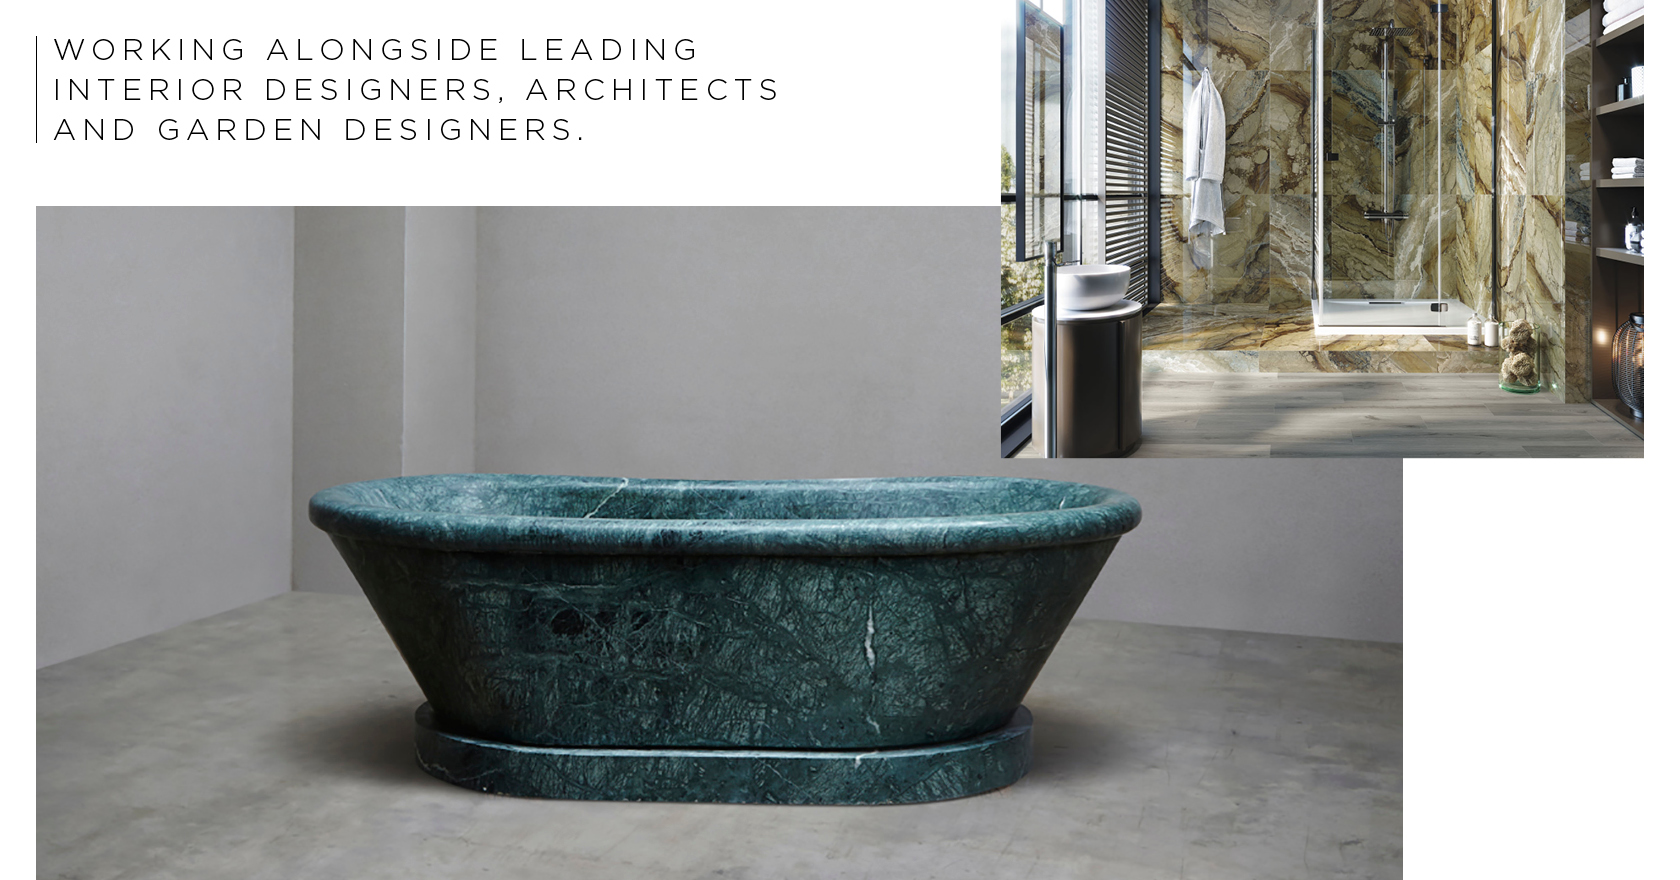 Lapicida works alongside leading interior designers, architects and garden designers for wall tiles, floor tiles and more